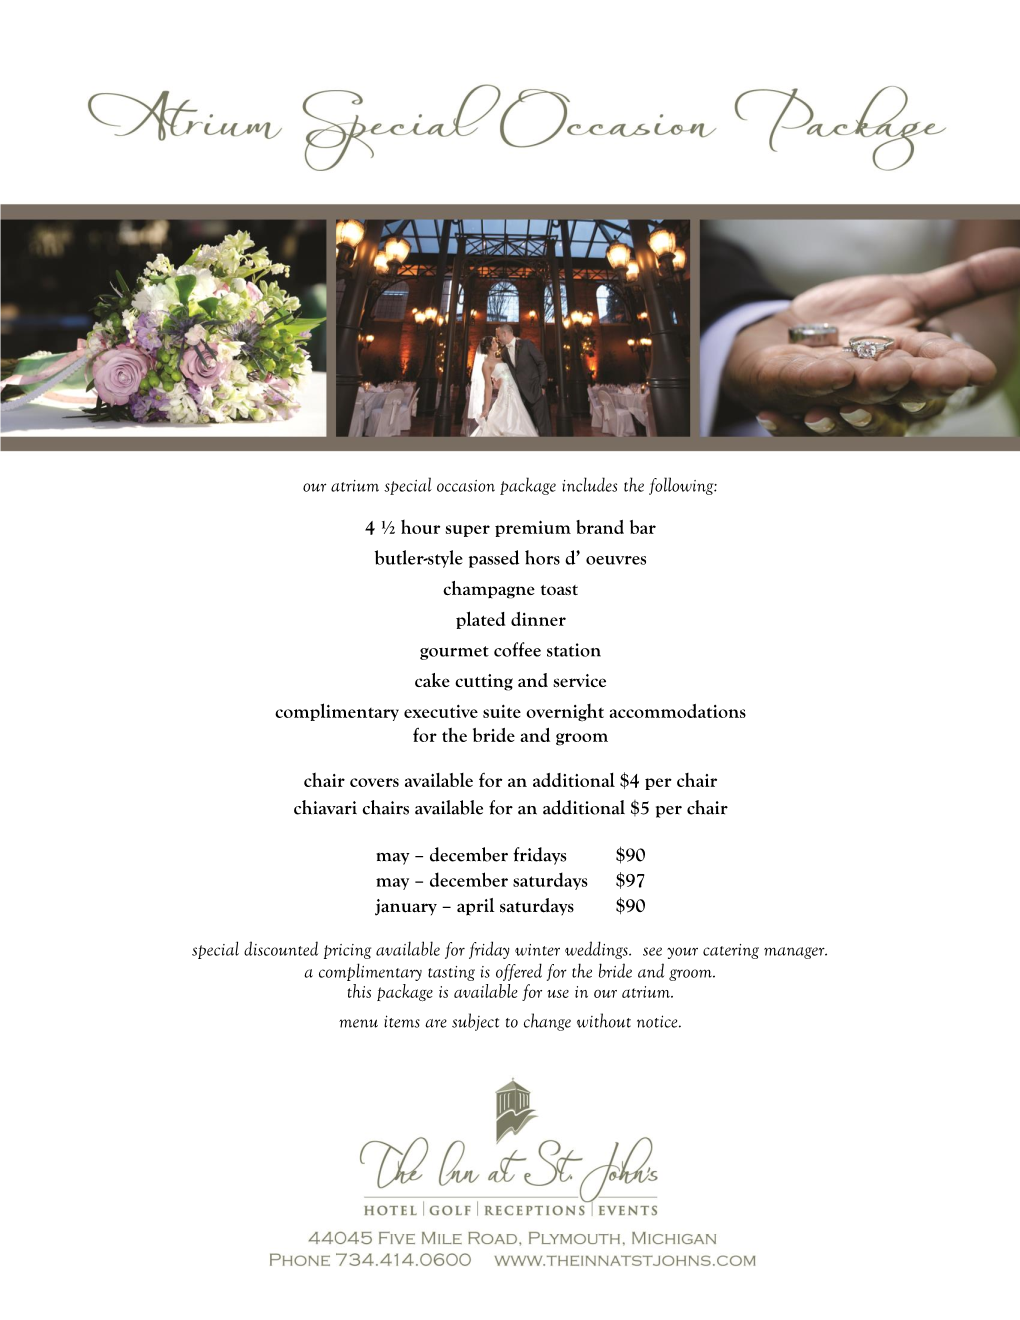 Our Atrium Special Occasion Package Includes the Following: 4 ½ Hour